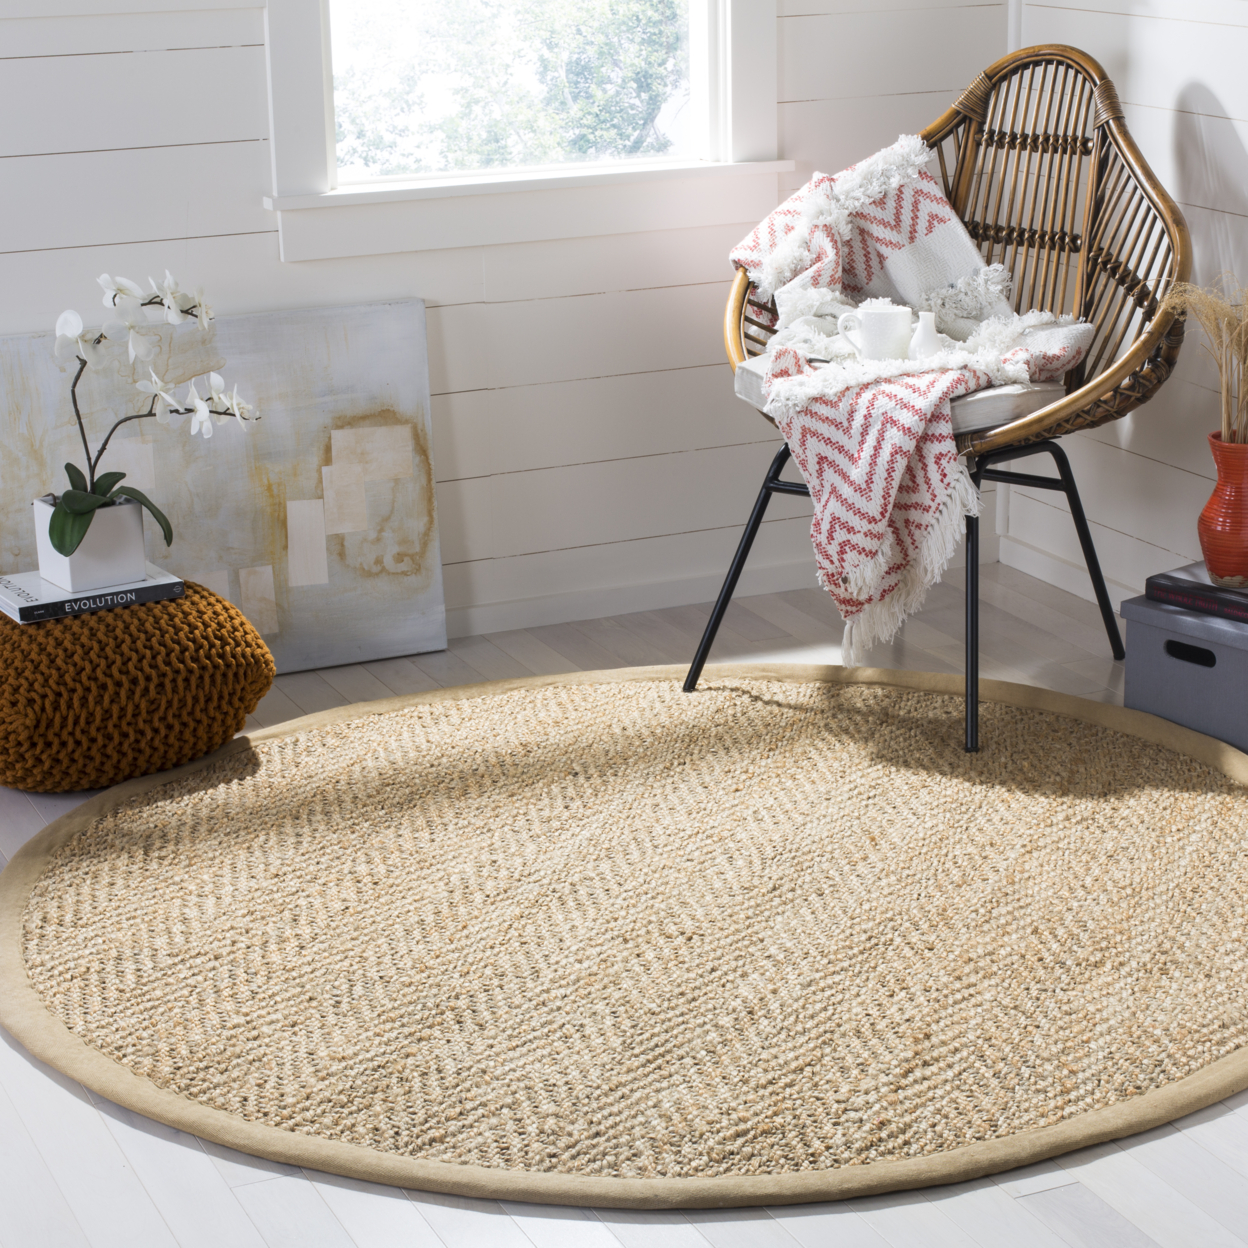 SAFAVIEH Natural Fiber Collection NF263A Natural Rug - 8' Round